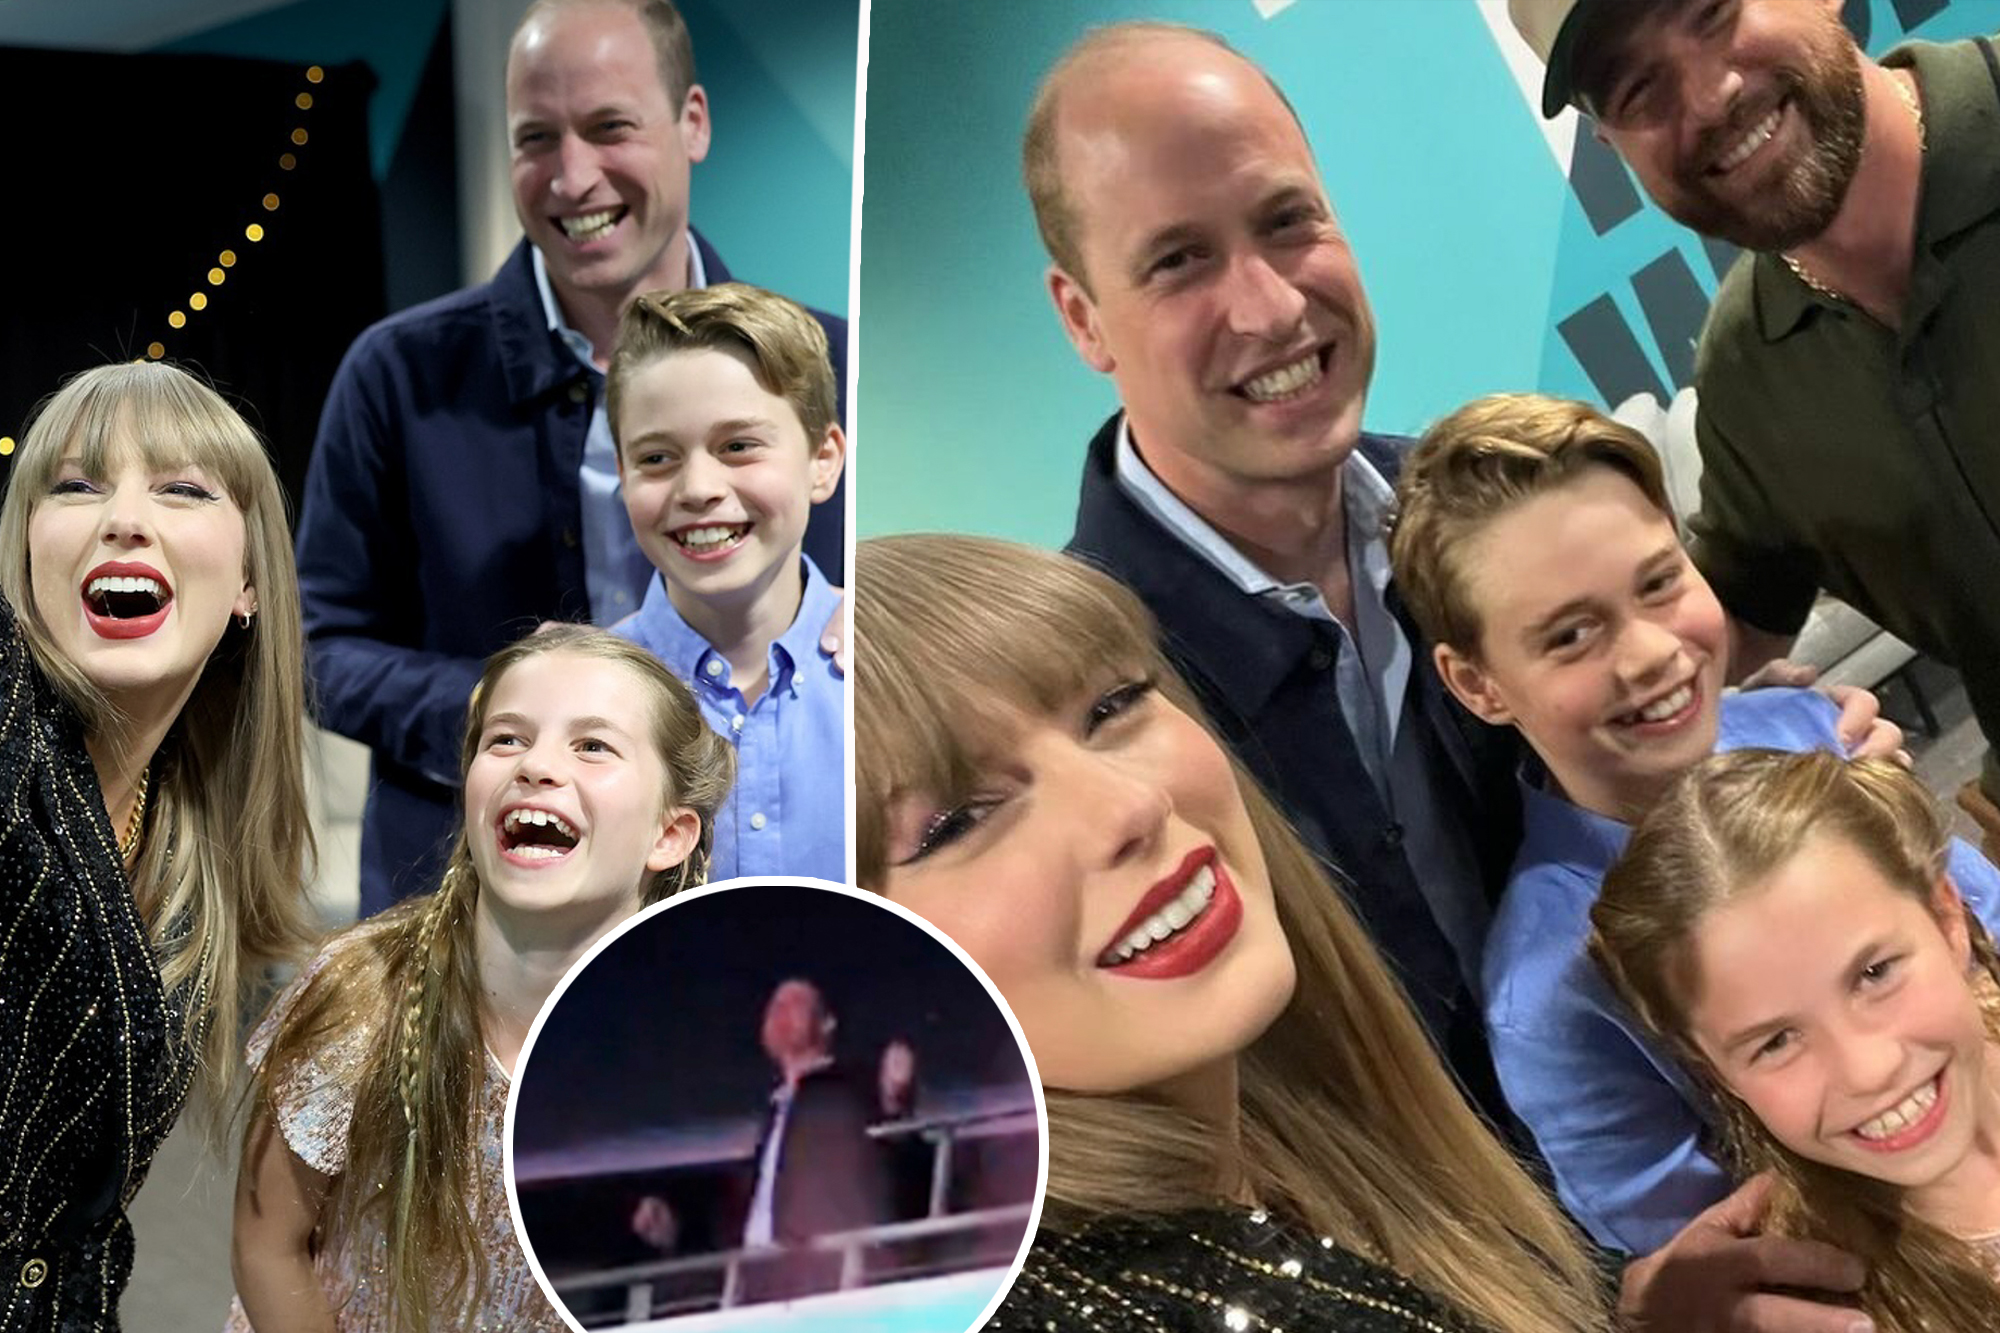 Prince William's Epic Dance Moves to Taylor Swift's 'Shake It Off' with His Kids at London Concert Goes Viral!